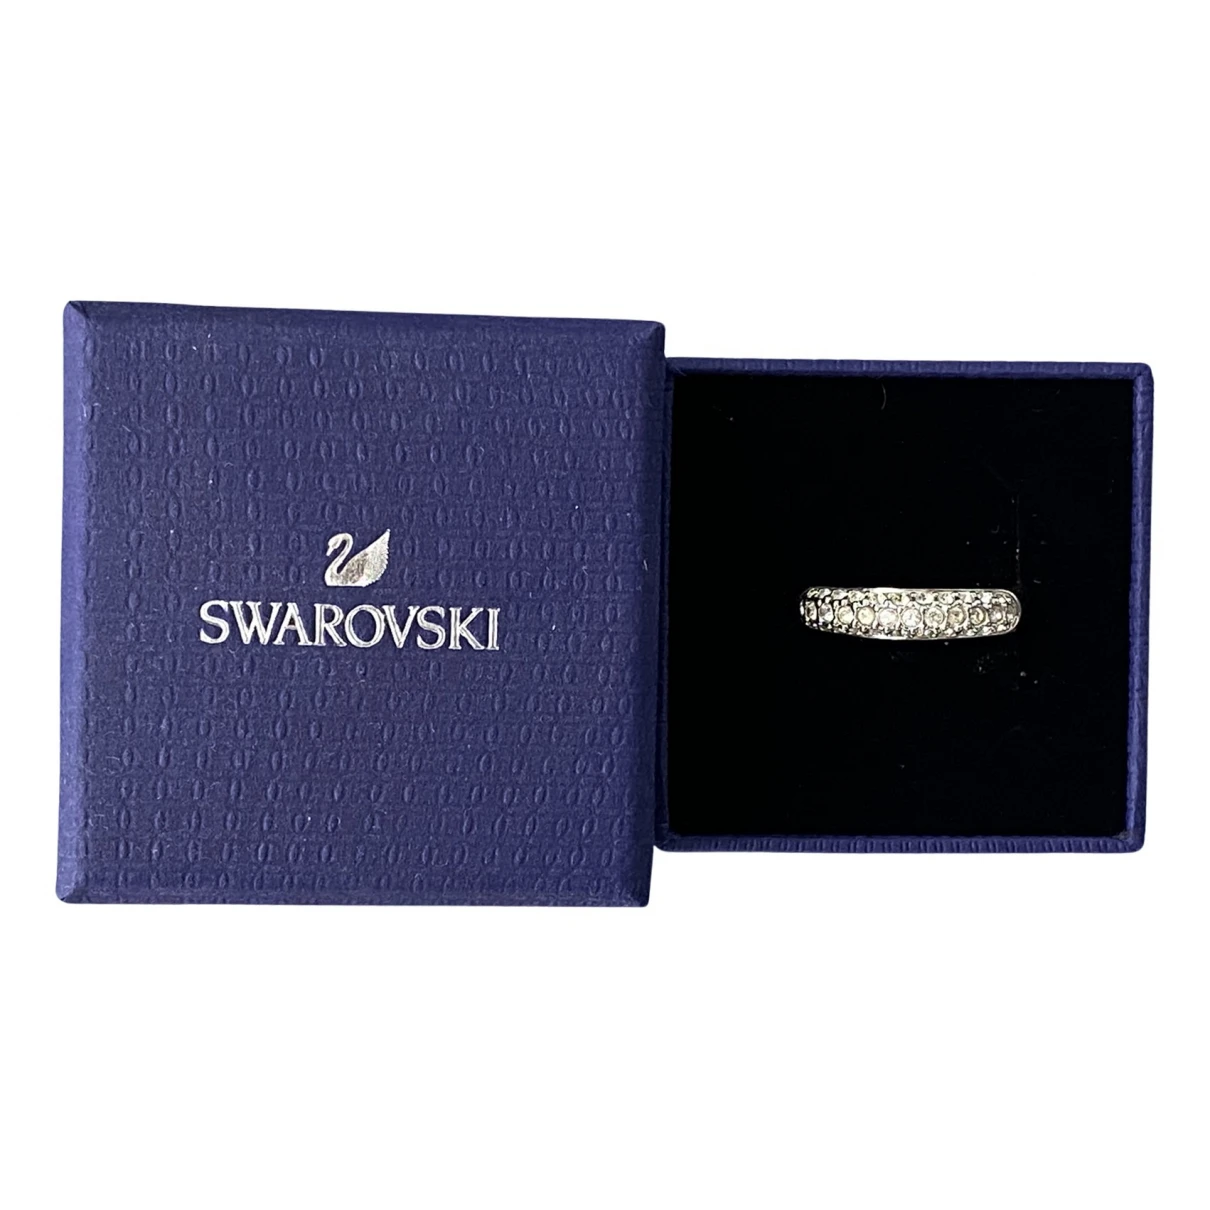 jewellery Swarovski rings for Female Other 60 EU. Used condition